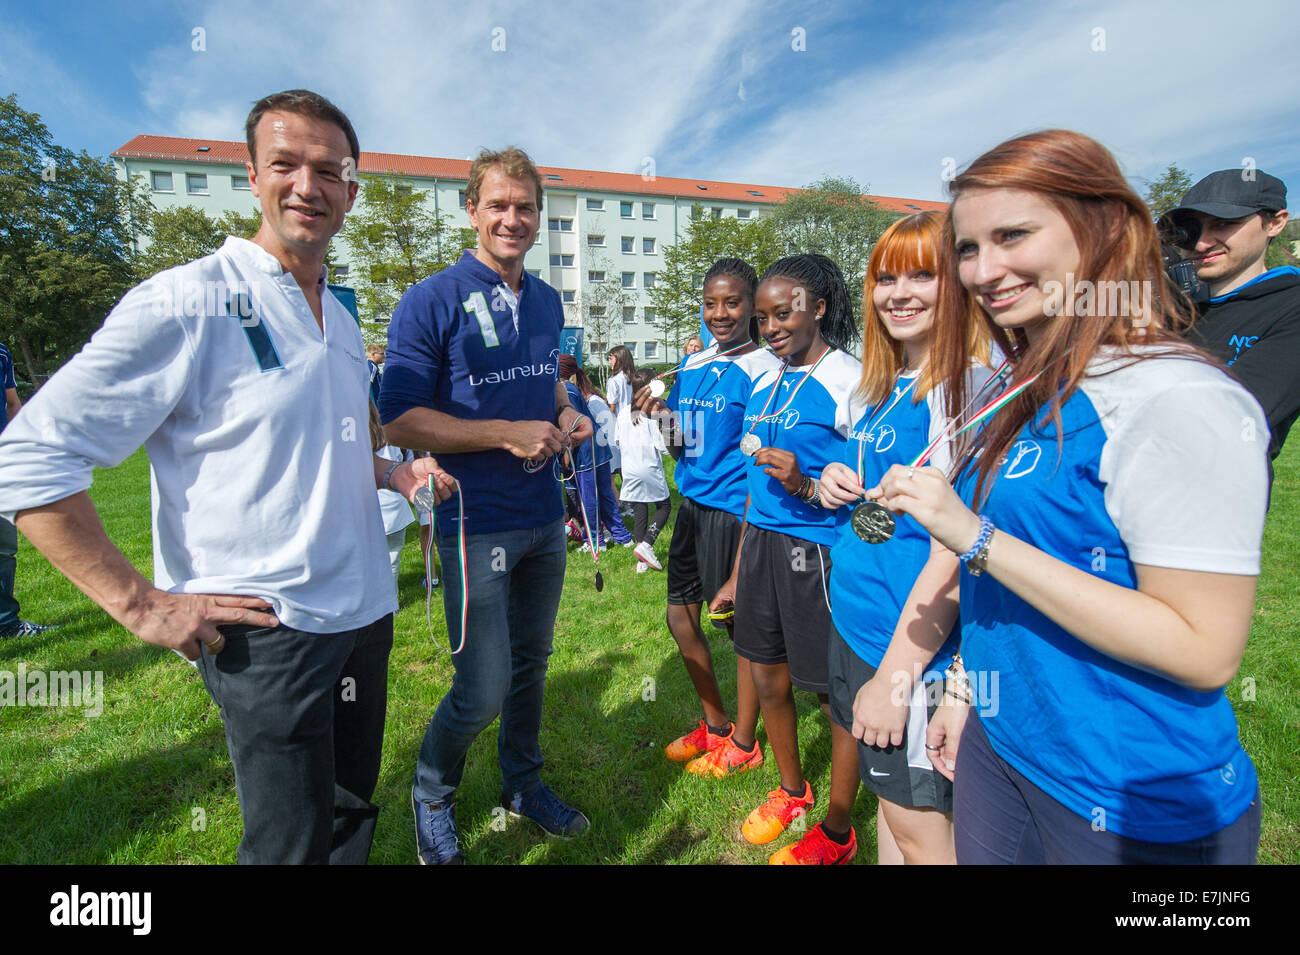 Laureus ambassadors, the soccer coach and former goalkeeper Jens Lehmann (2-L) and soccer coach Fredi Bobic (L) stand together with coaches of the project 'Kicking Girls' at the sports field of the primary school Bad-Soden-Strasse in Munich, Germany, 19 September 2014. Ambassadors of the Laureus foundation visit children and coaches of the project 'Kicking Girls' which offers sport working-groups at schools for girls with a migratory background. Photo: Tobias Hase/dpa Stock Photo